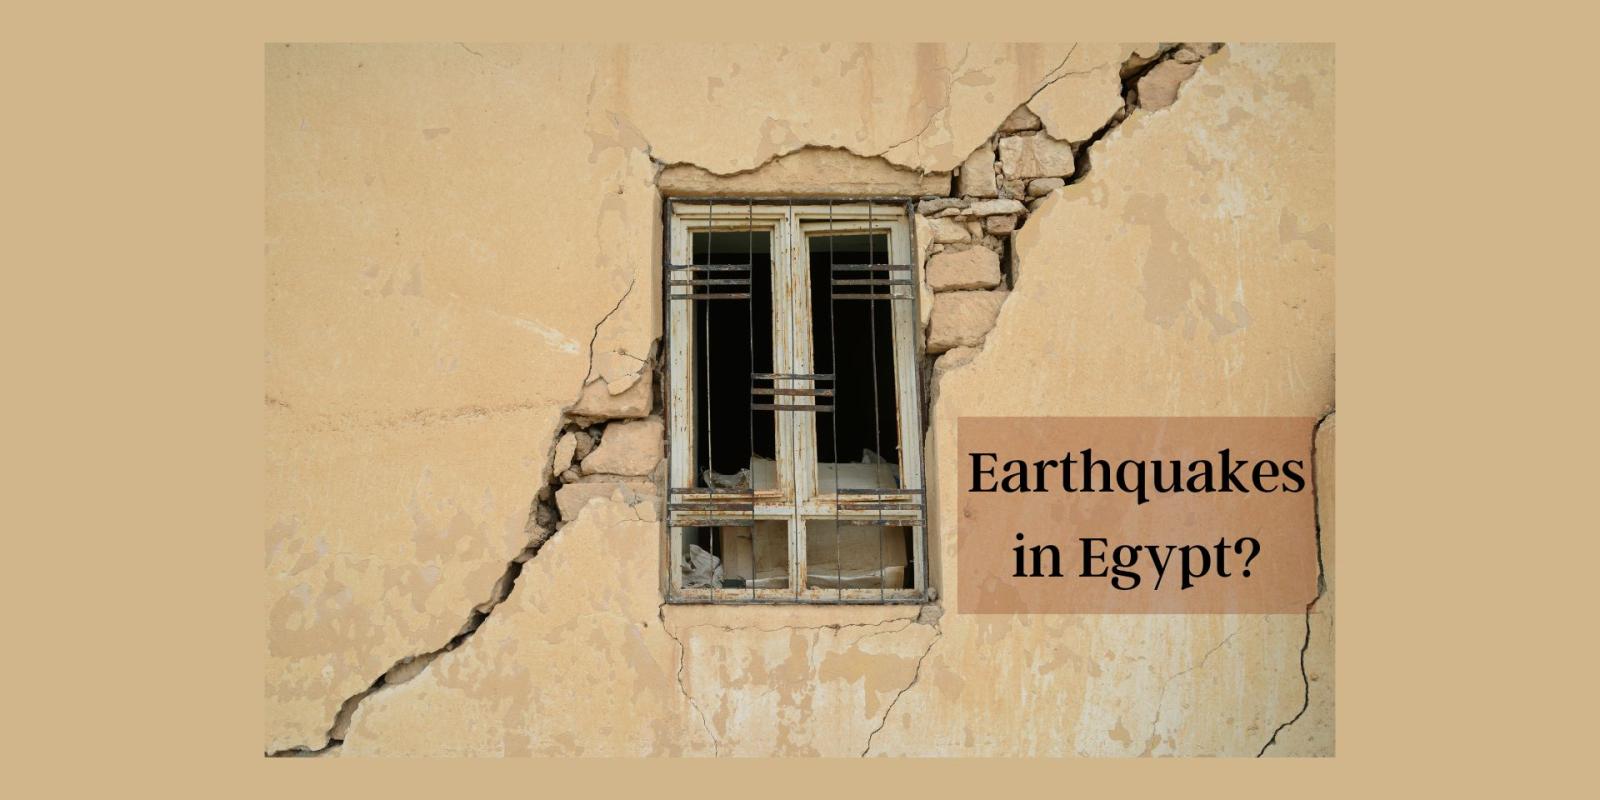 A crack runs along the side of a wall through a window and exposes brick under plaster, with the text "Earthquakes in Egypt?" in the bottom right hand corner